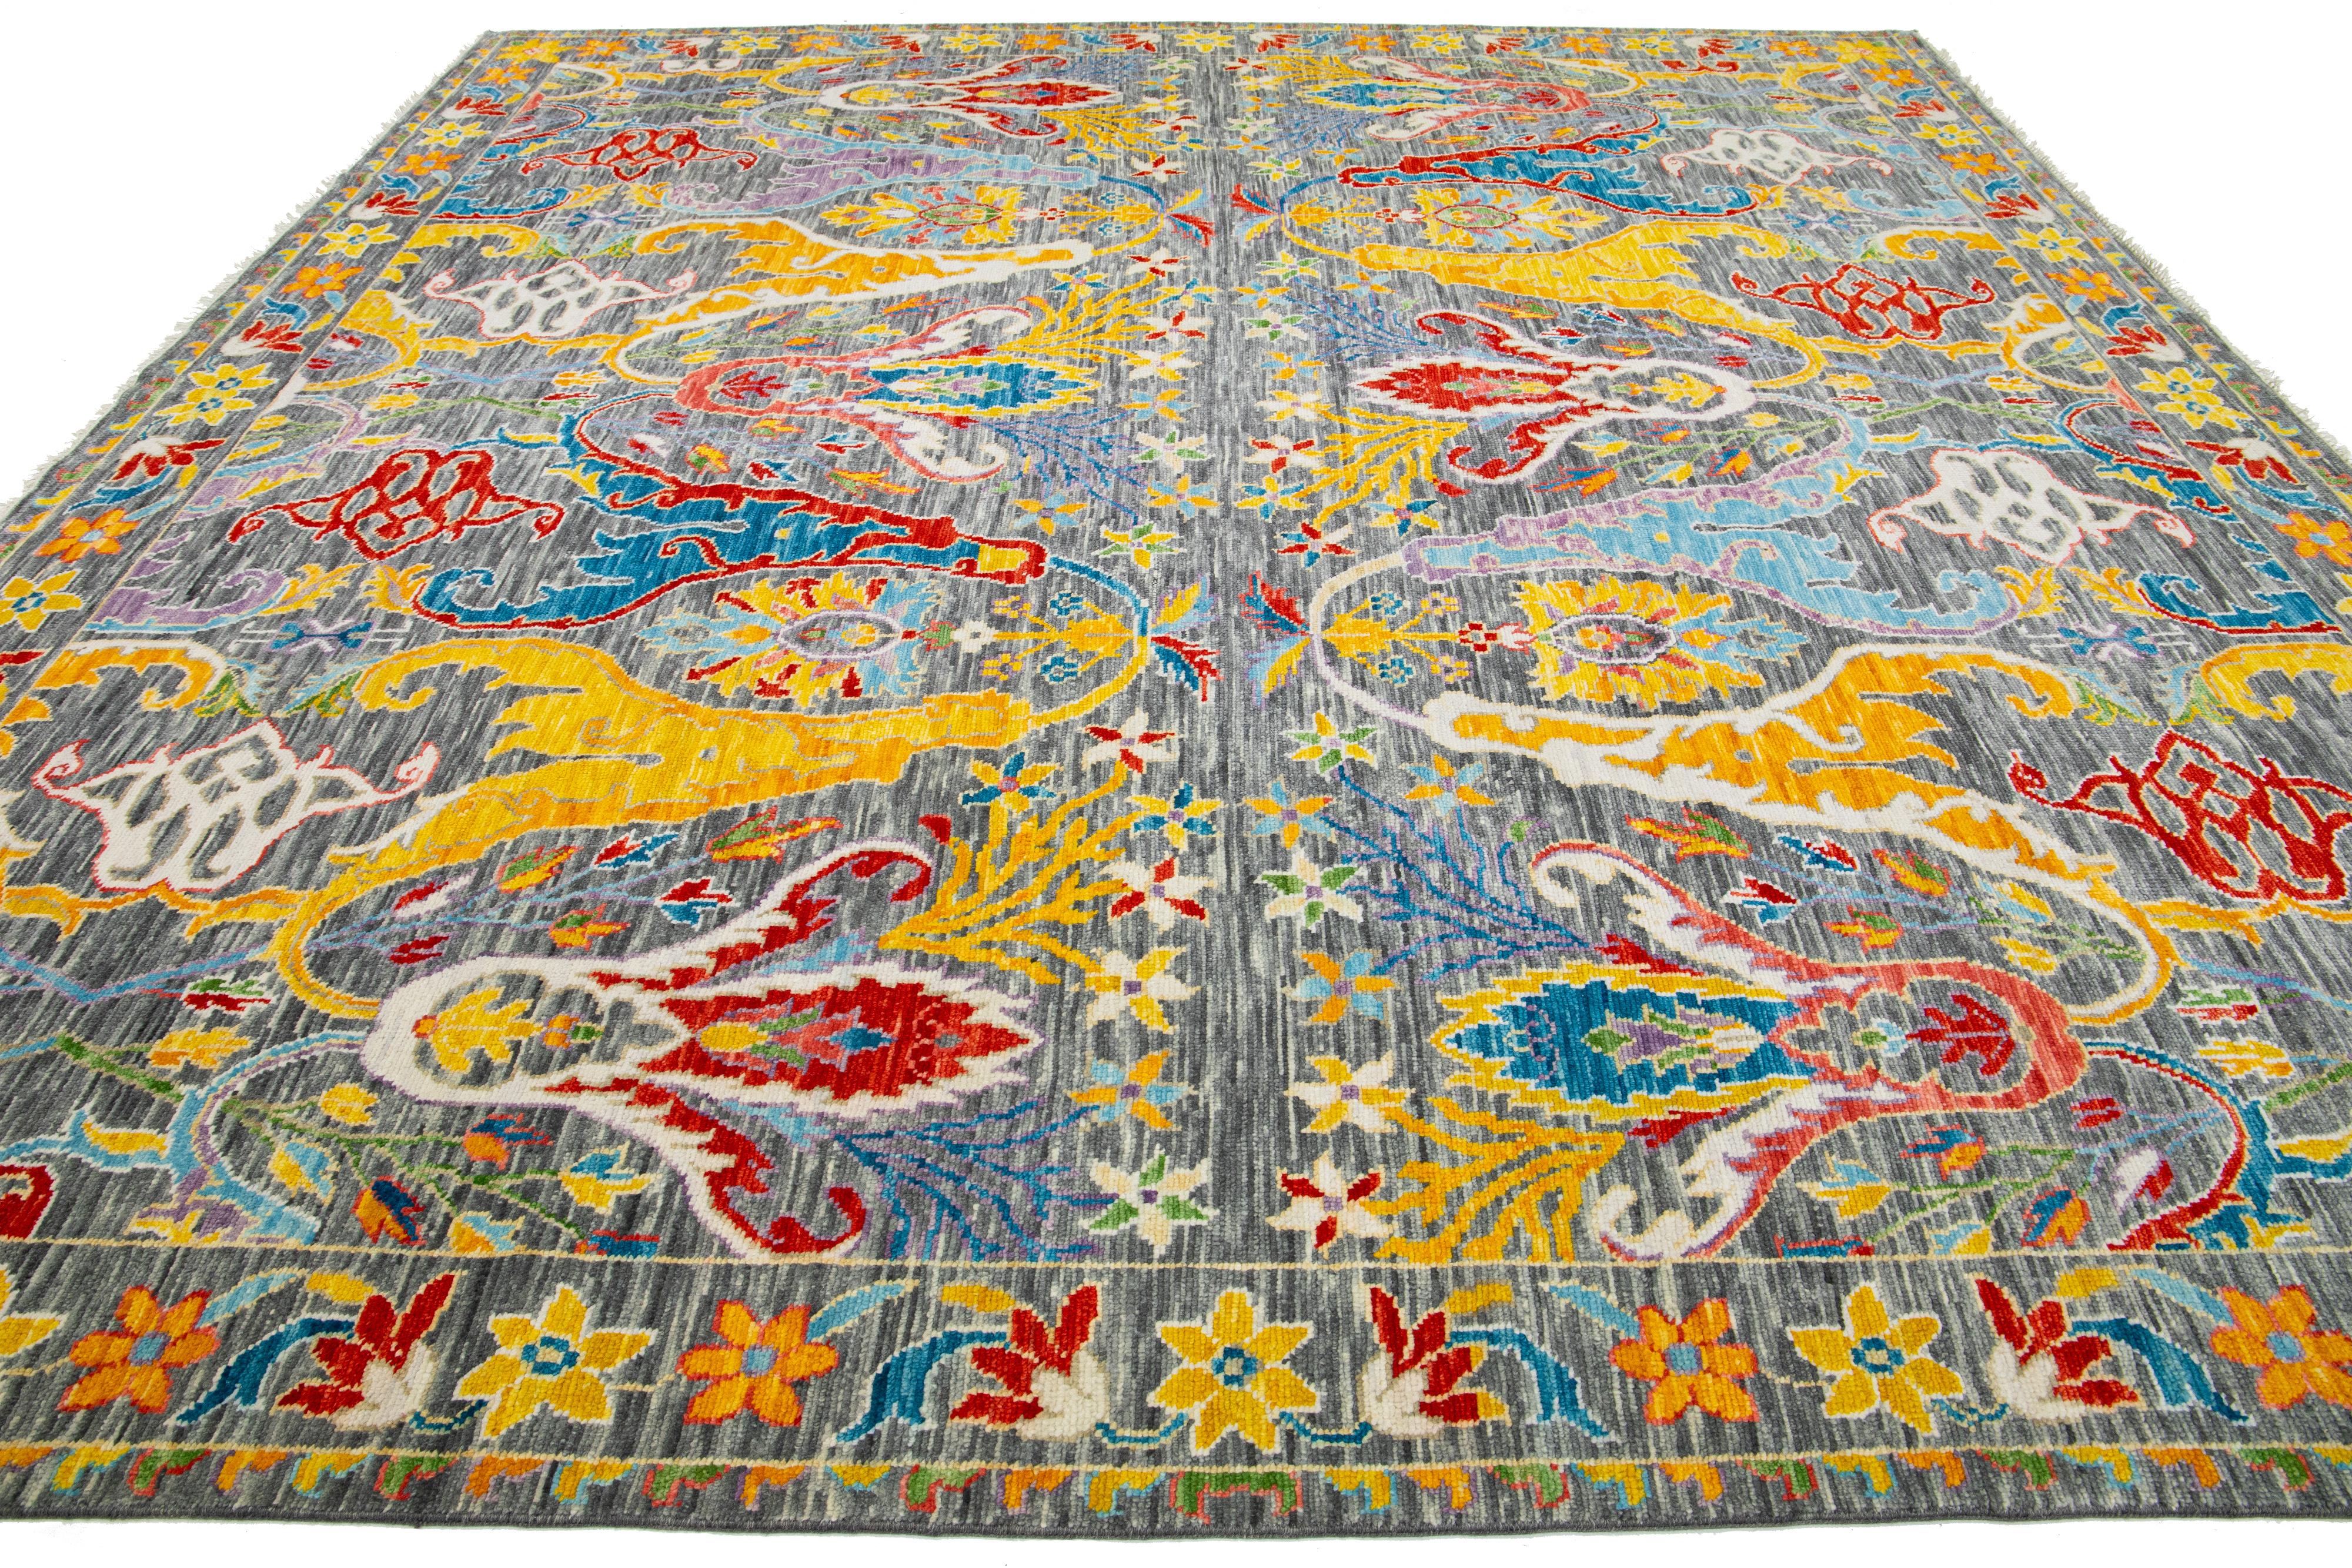 This square wool rug in Oushak style showcases a hand-knotted gray background, exuding a modern aesthetic with its vibrant, multicolored floral design spread throughout.

This rug measures 11'9